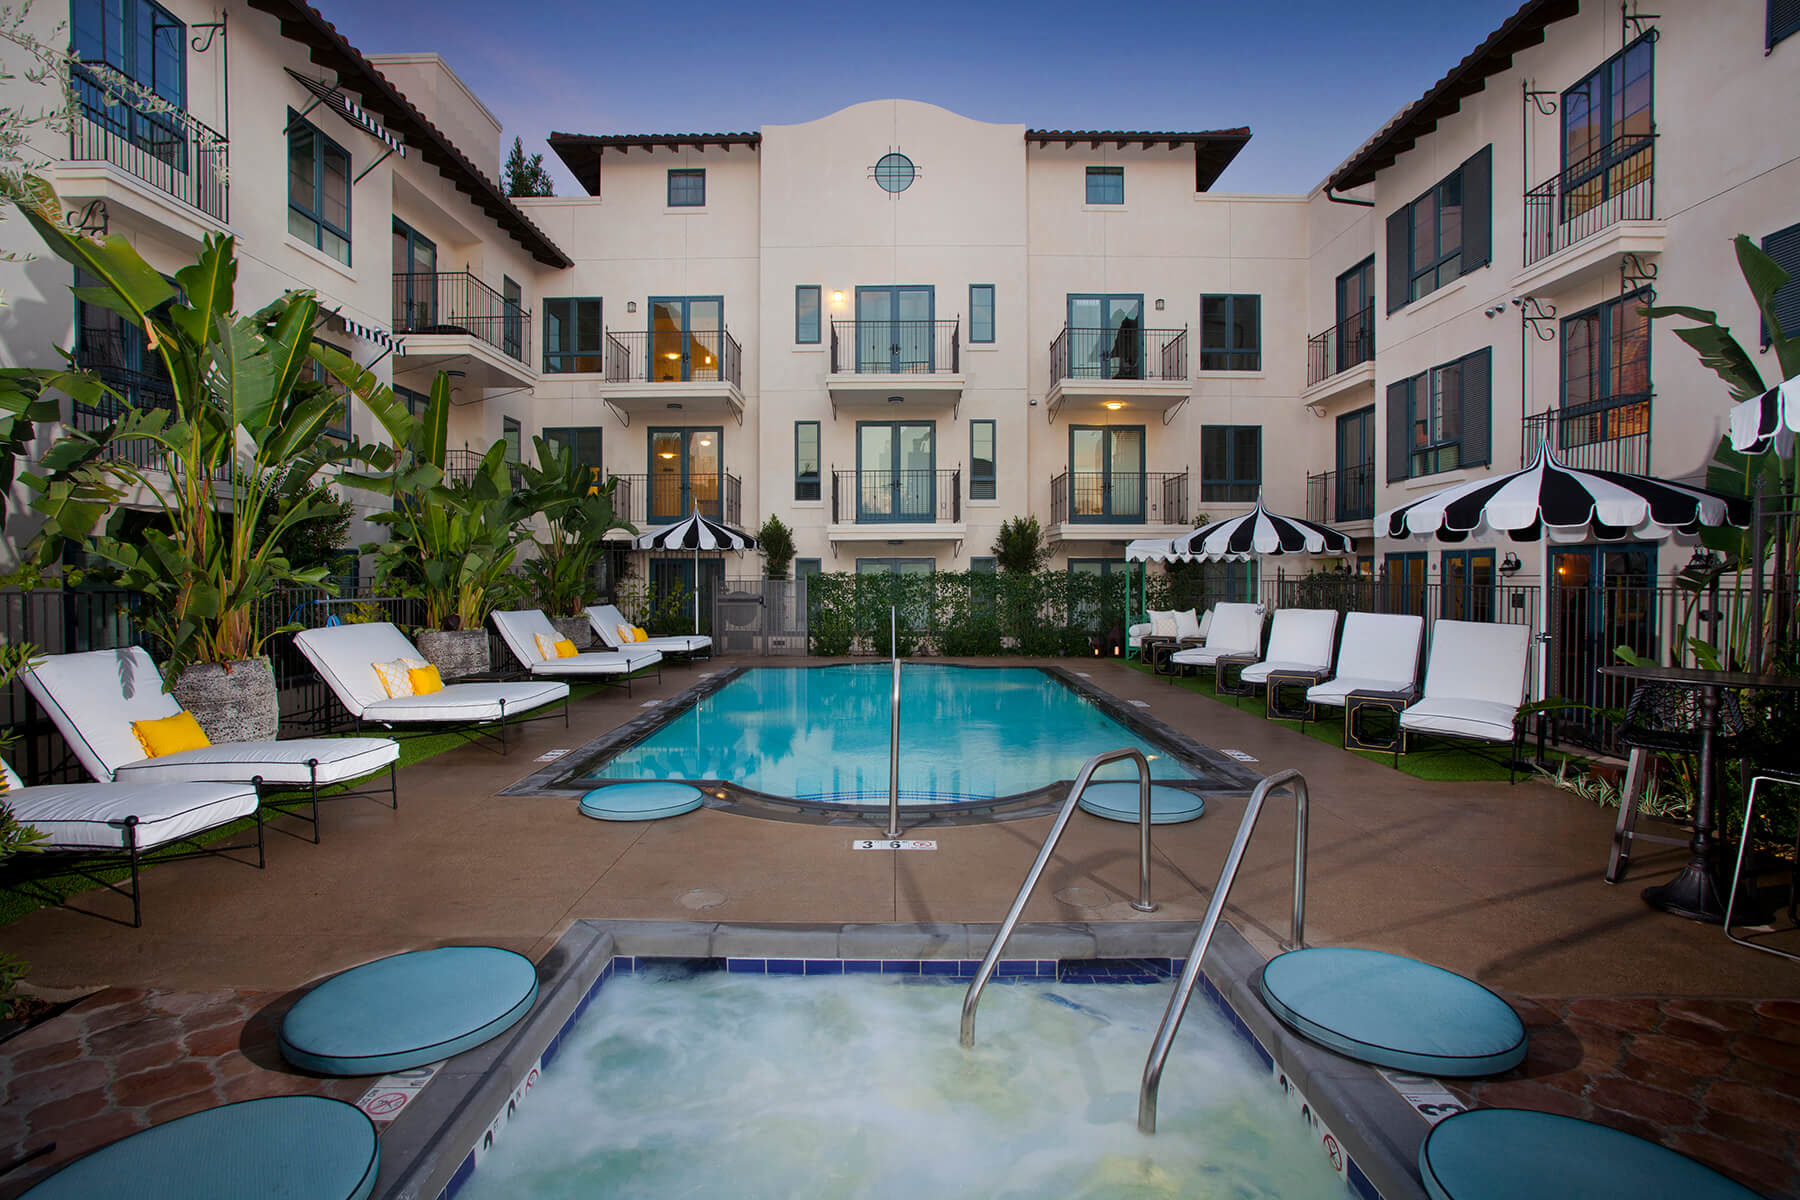 The luxury pool and lounge seating at the Candara at Hancock Park in Los Angeles, California.